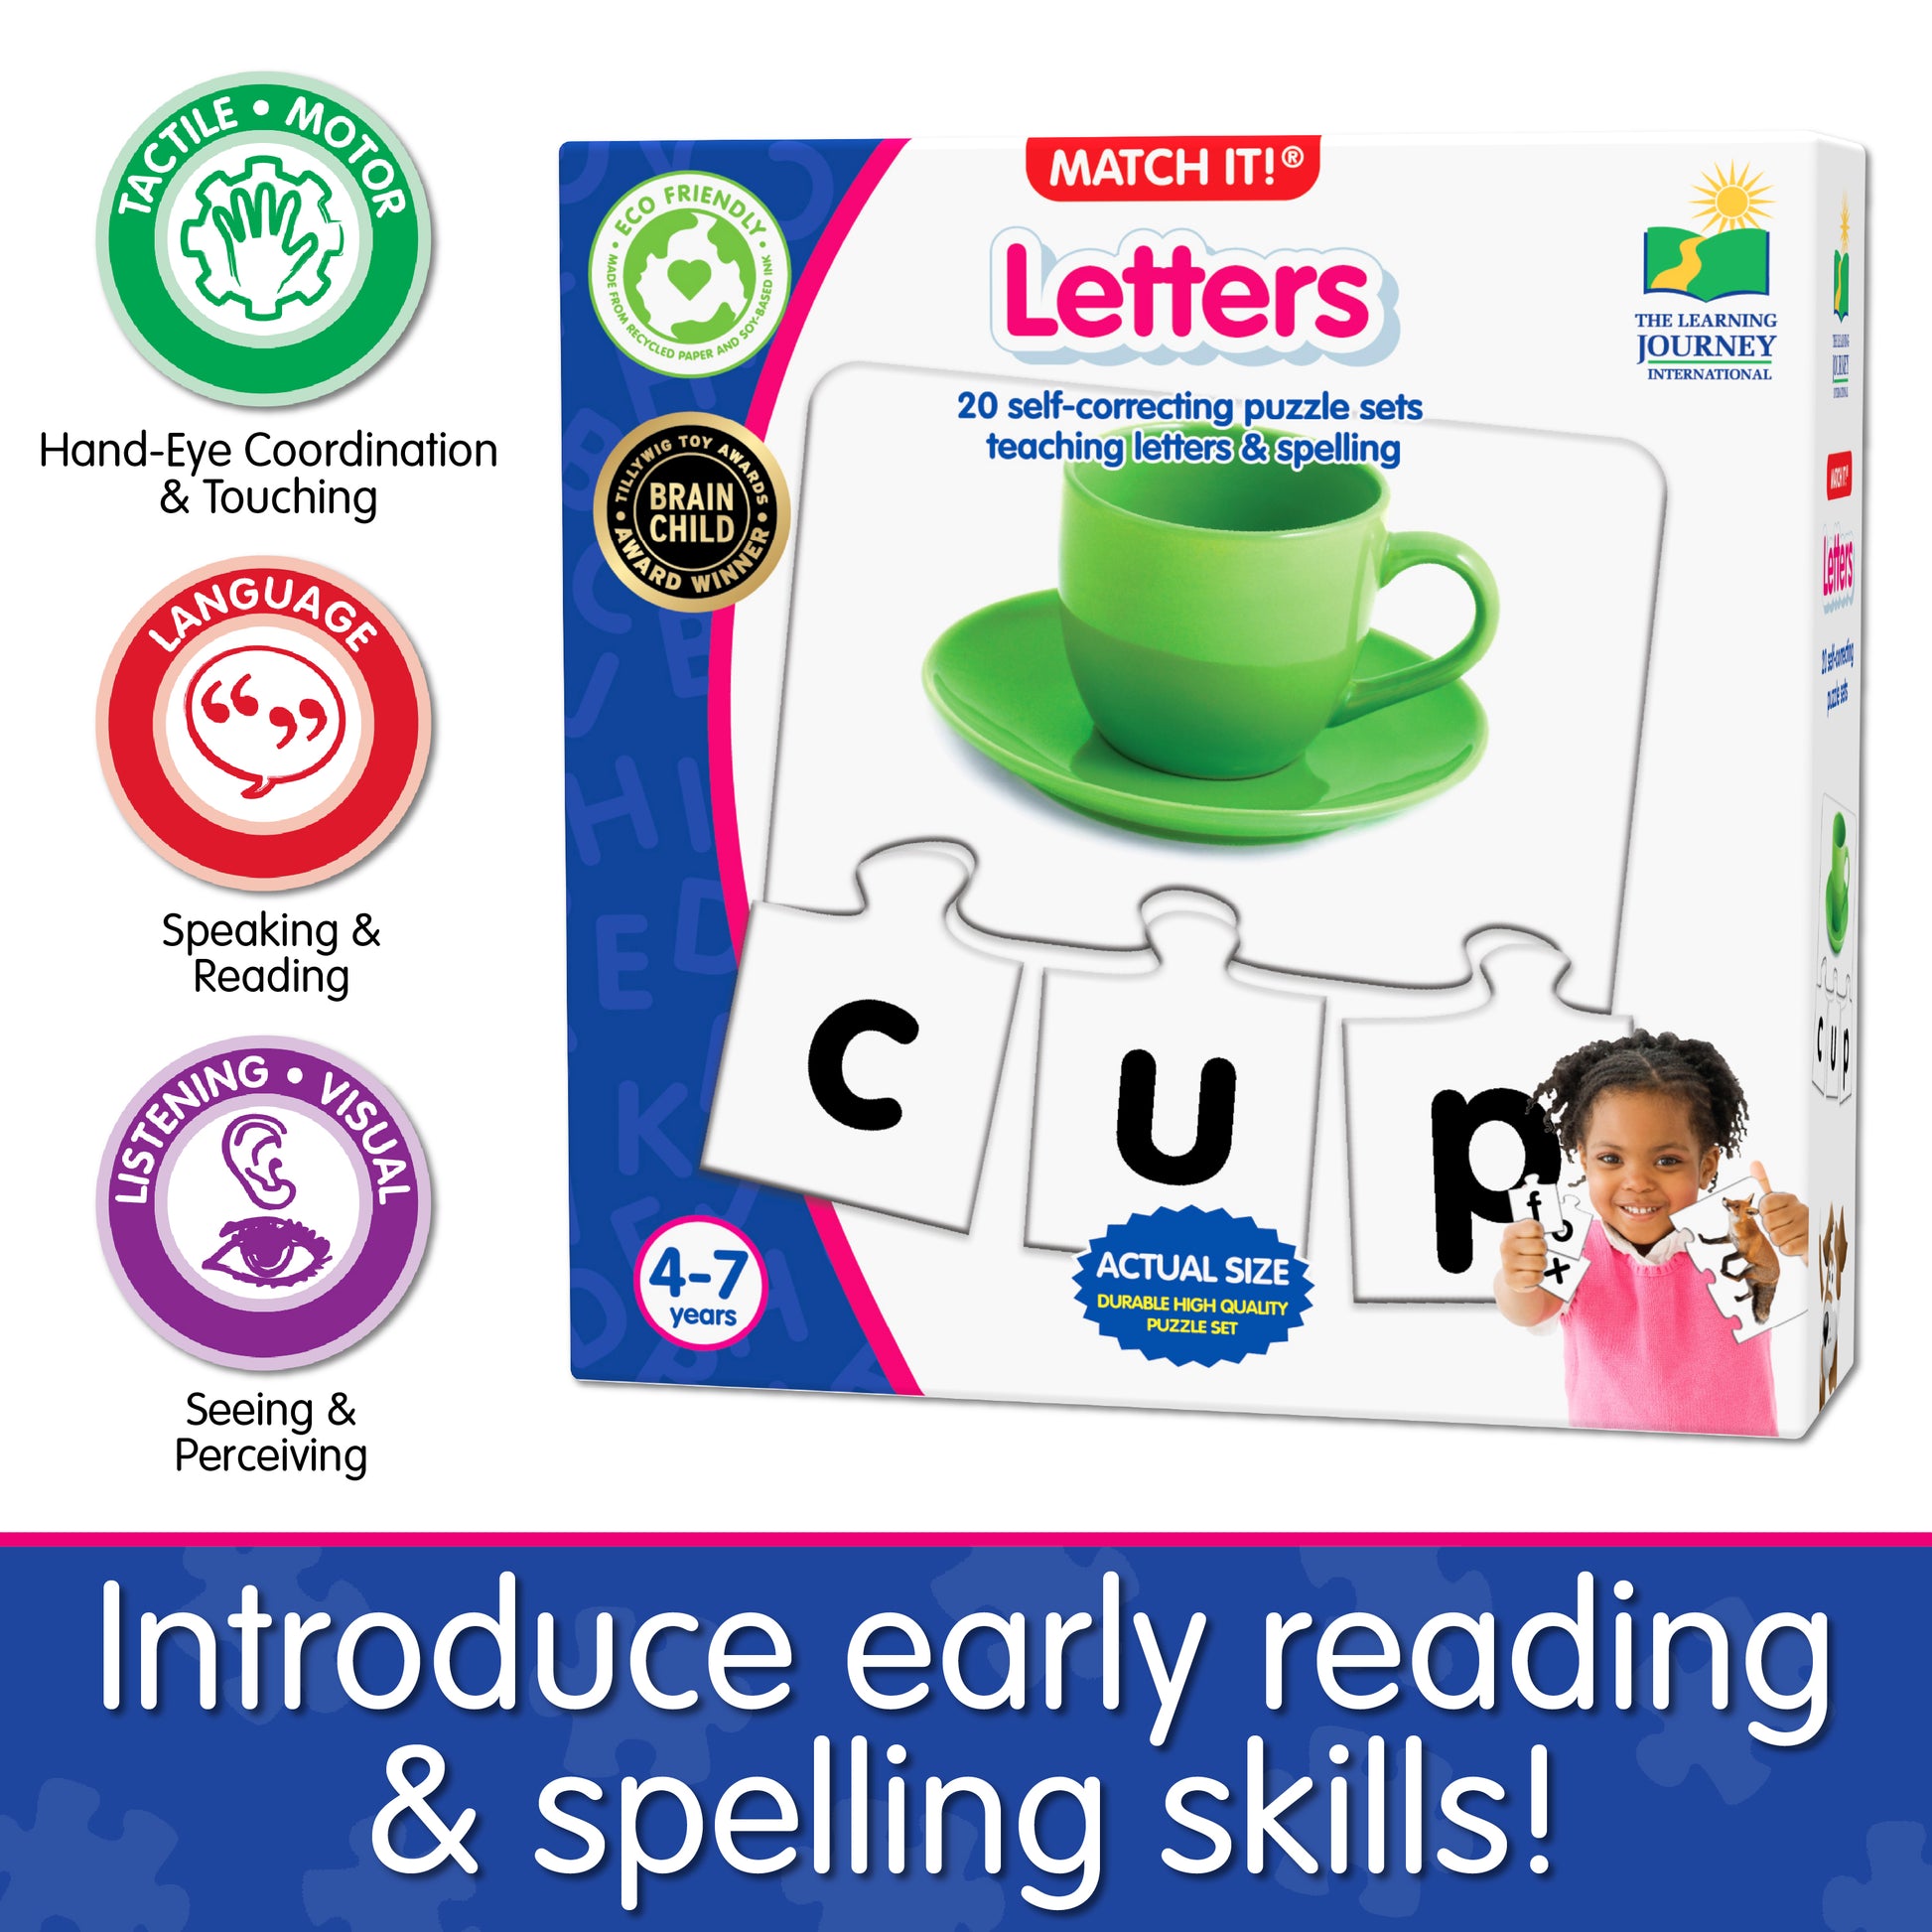 Infographic about Match It - Letters' educational benefits that says, "Introduce early reading skills!"